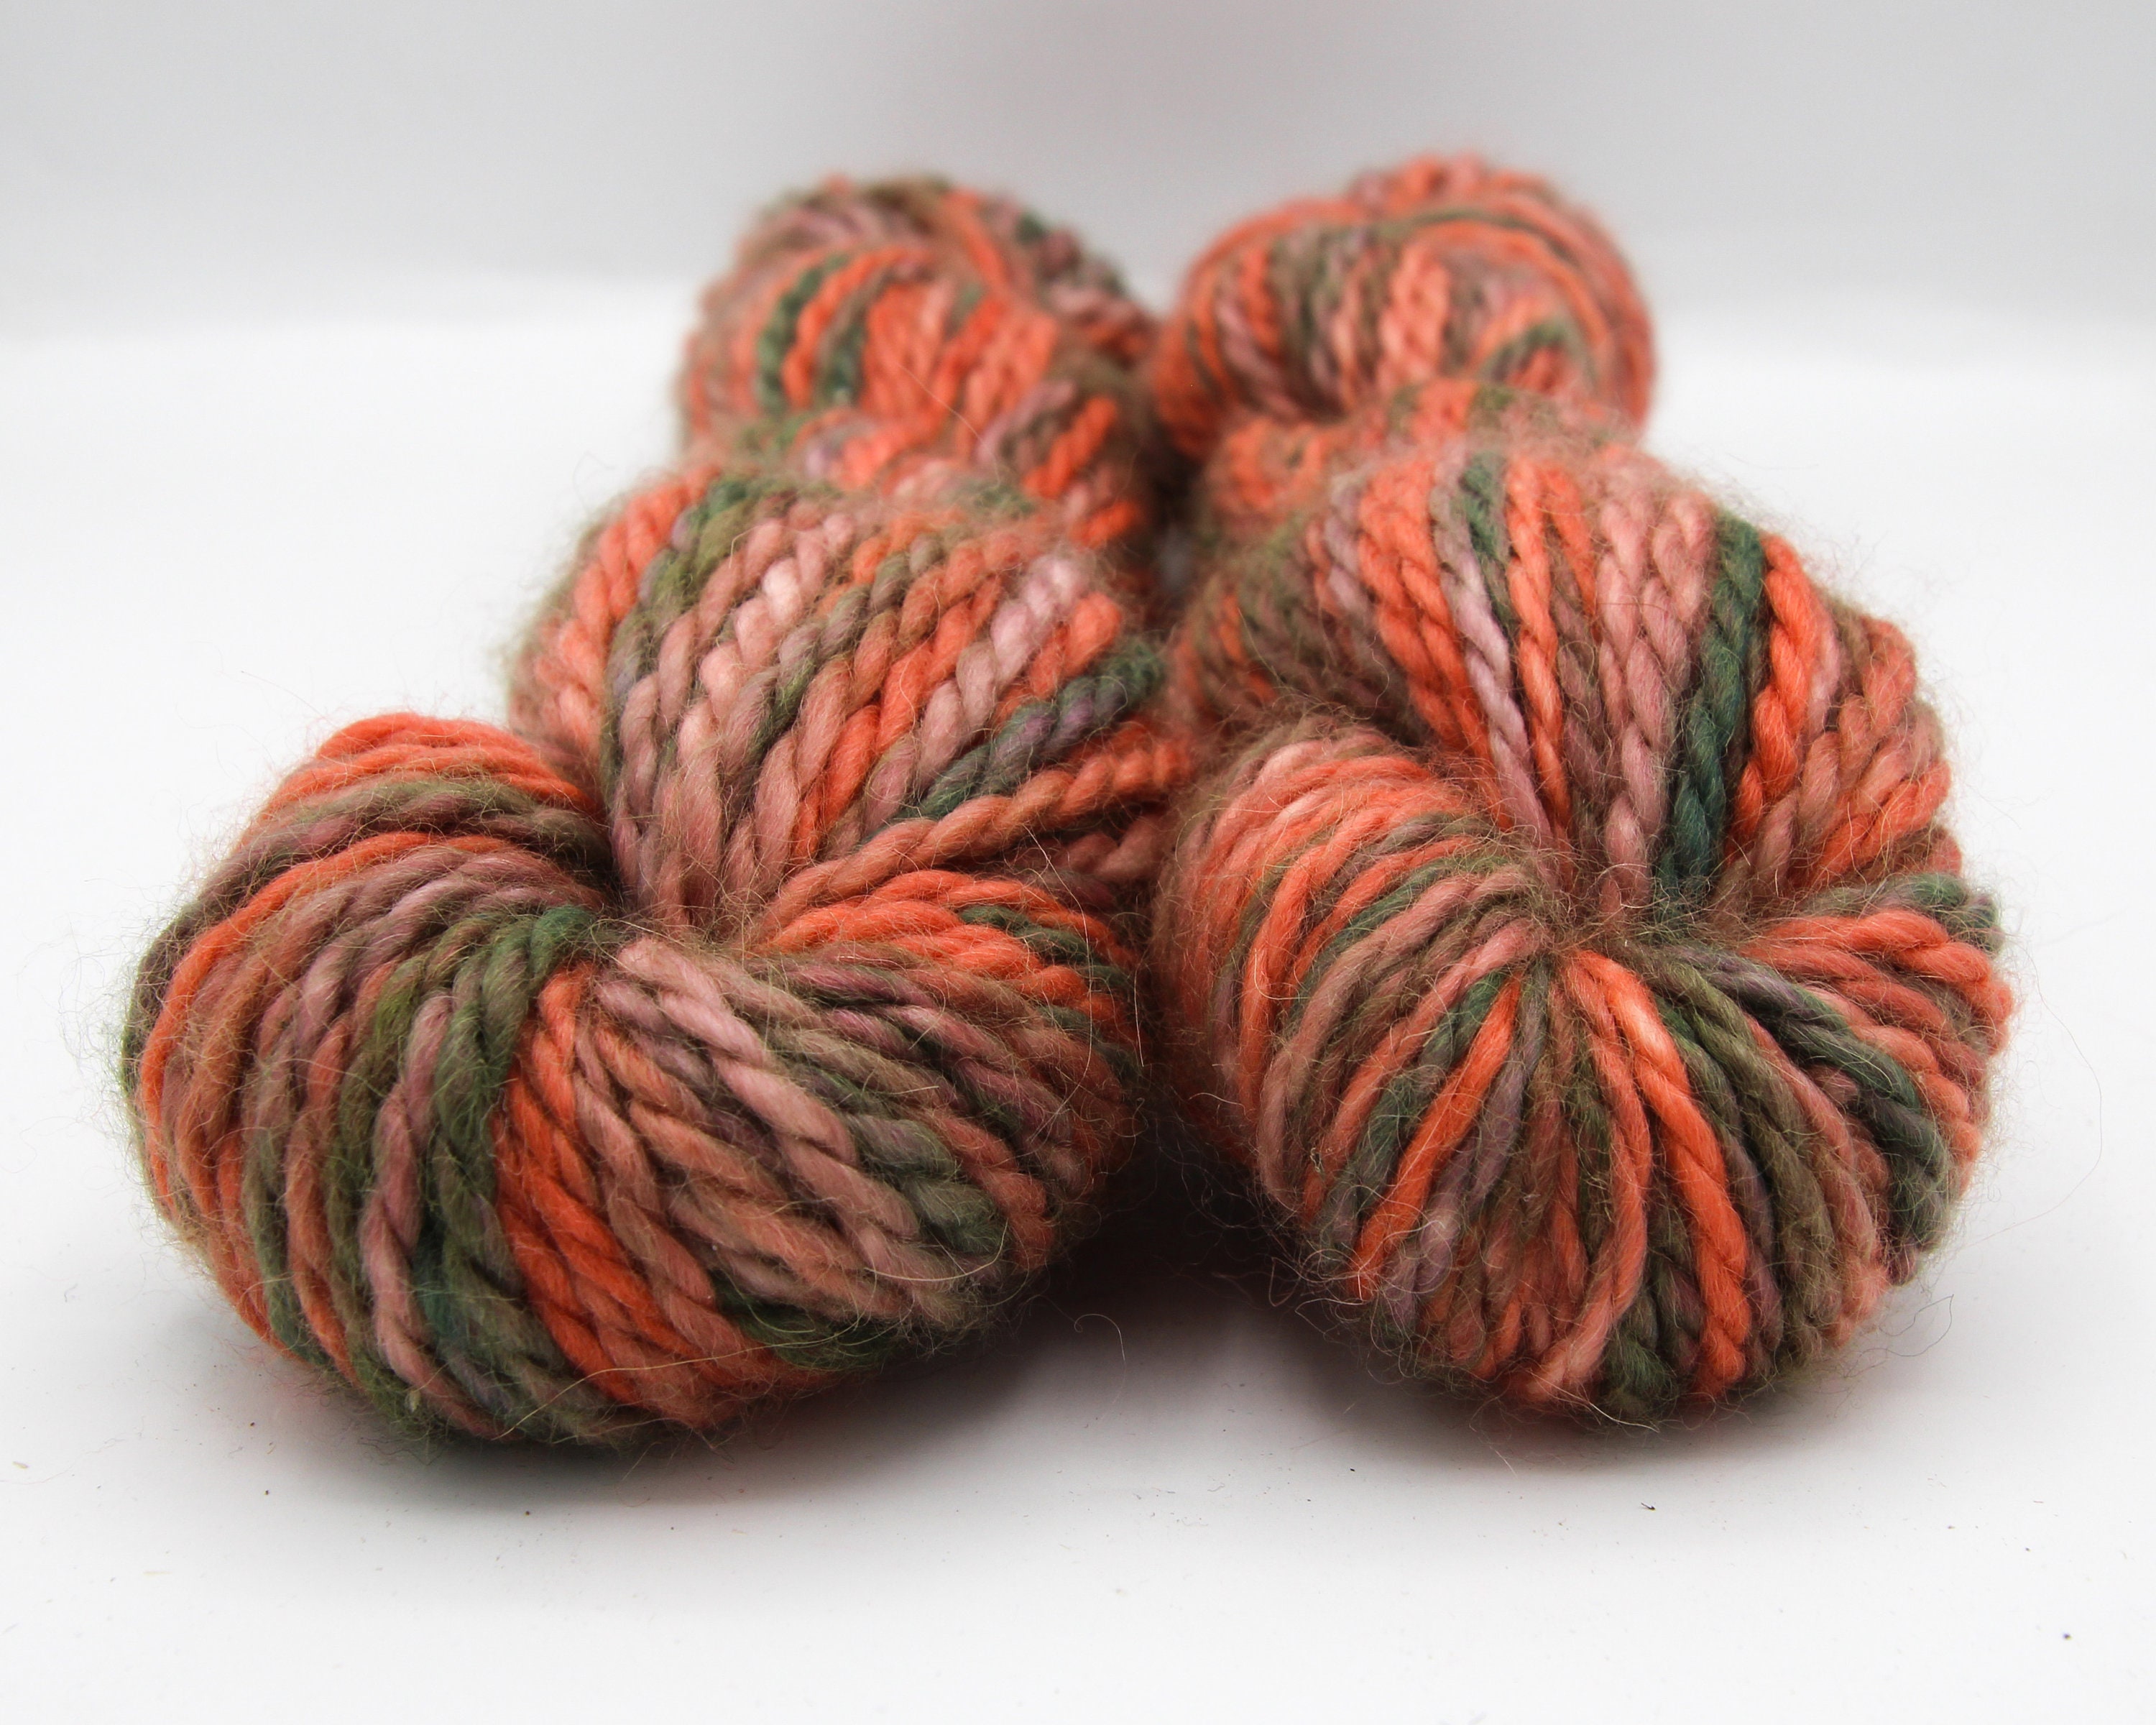 Classic Alpaca Yarn, DK Weight, Collection of Pinks, Reds, Oranges